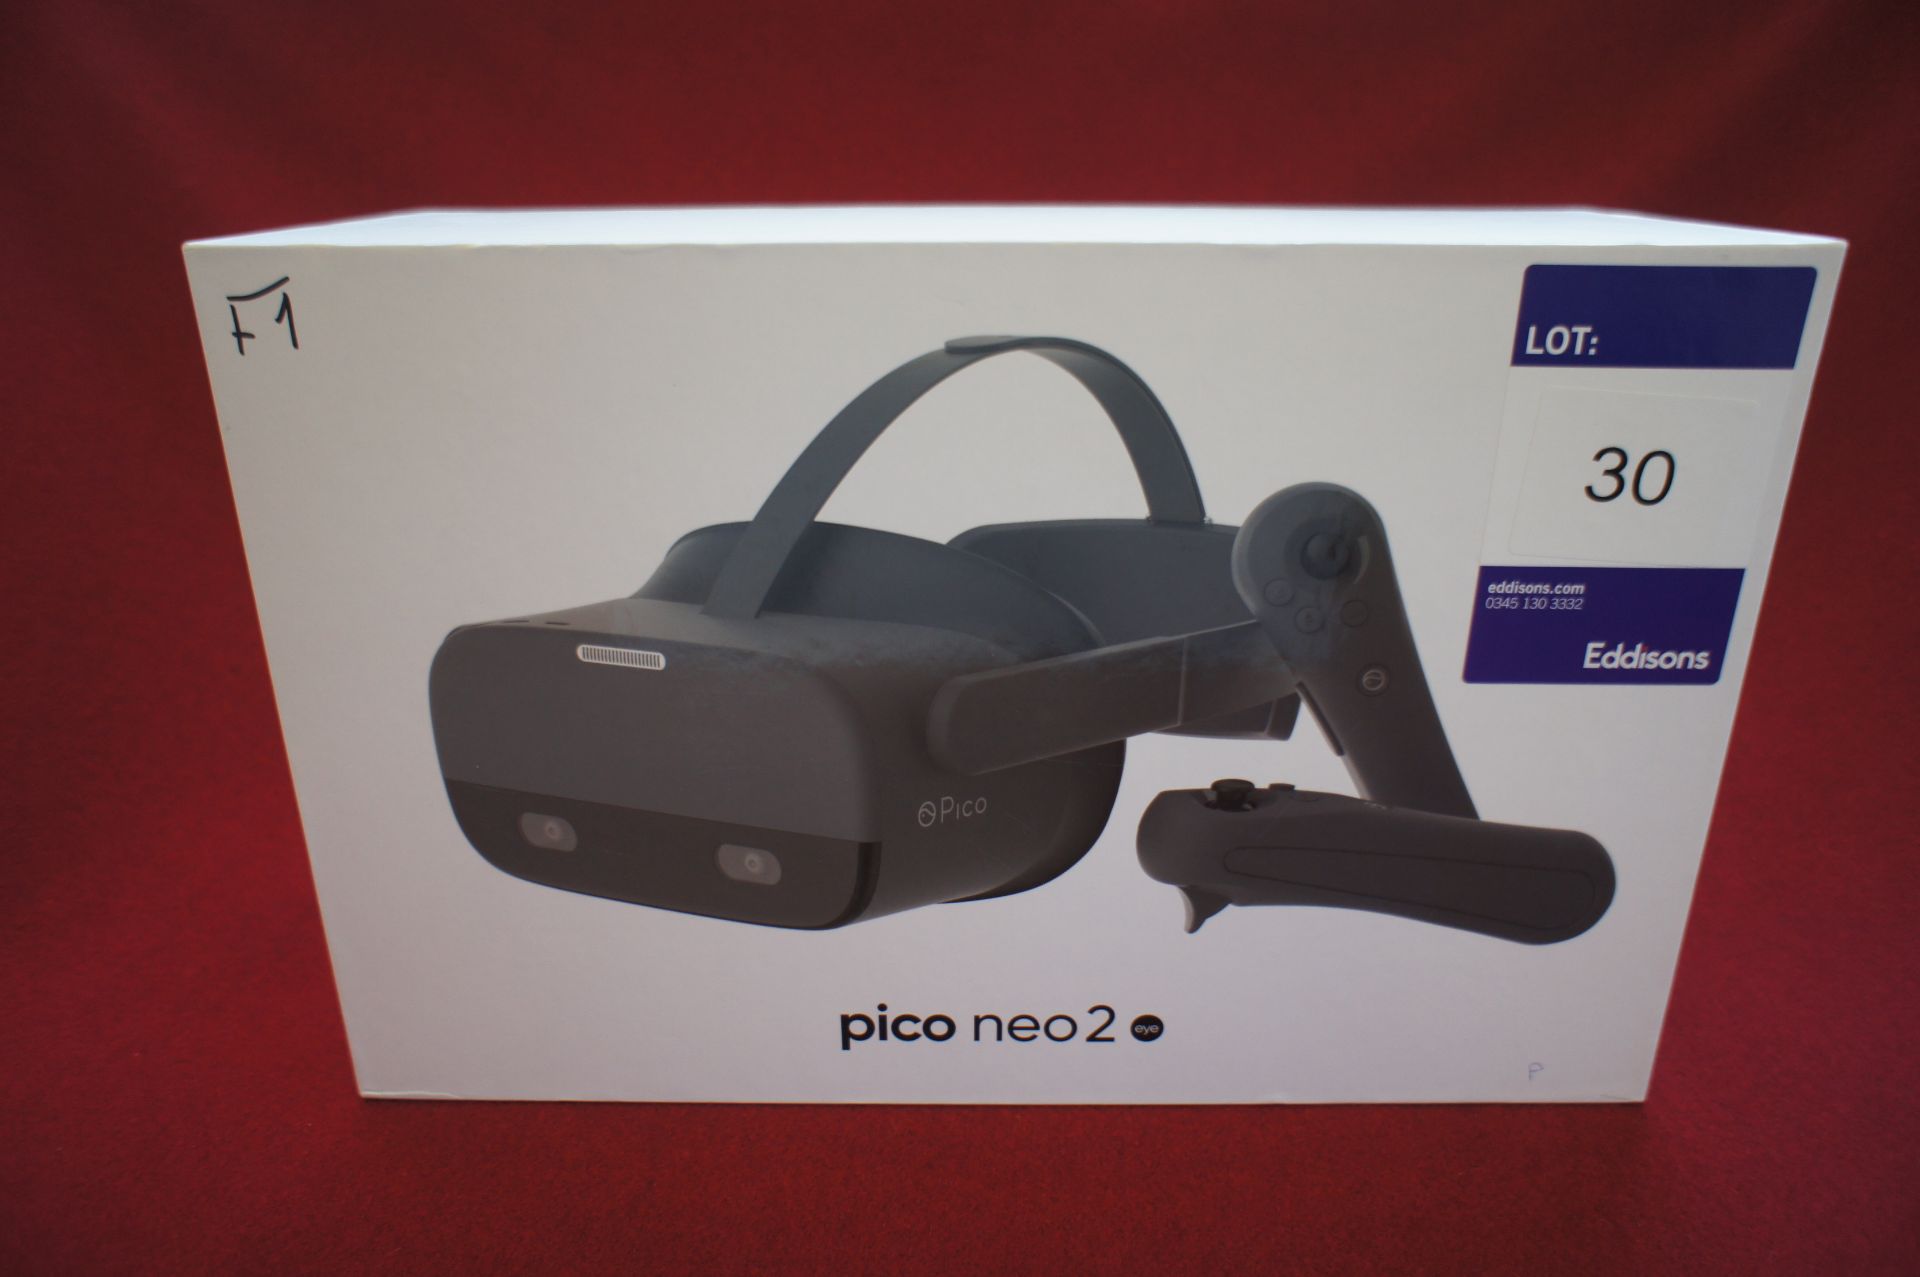 Pico Neo 2 EYE VR headset, Asset Number F1, S/N PA